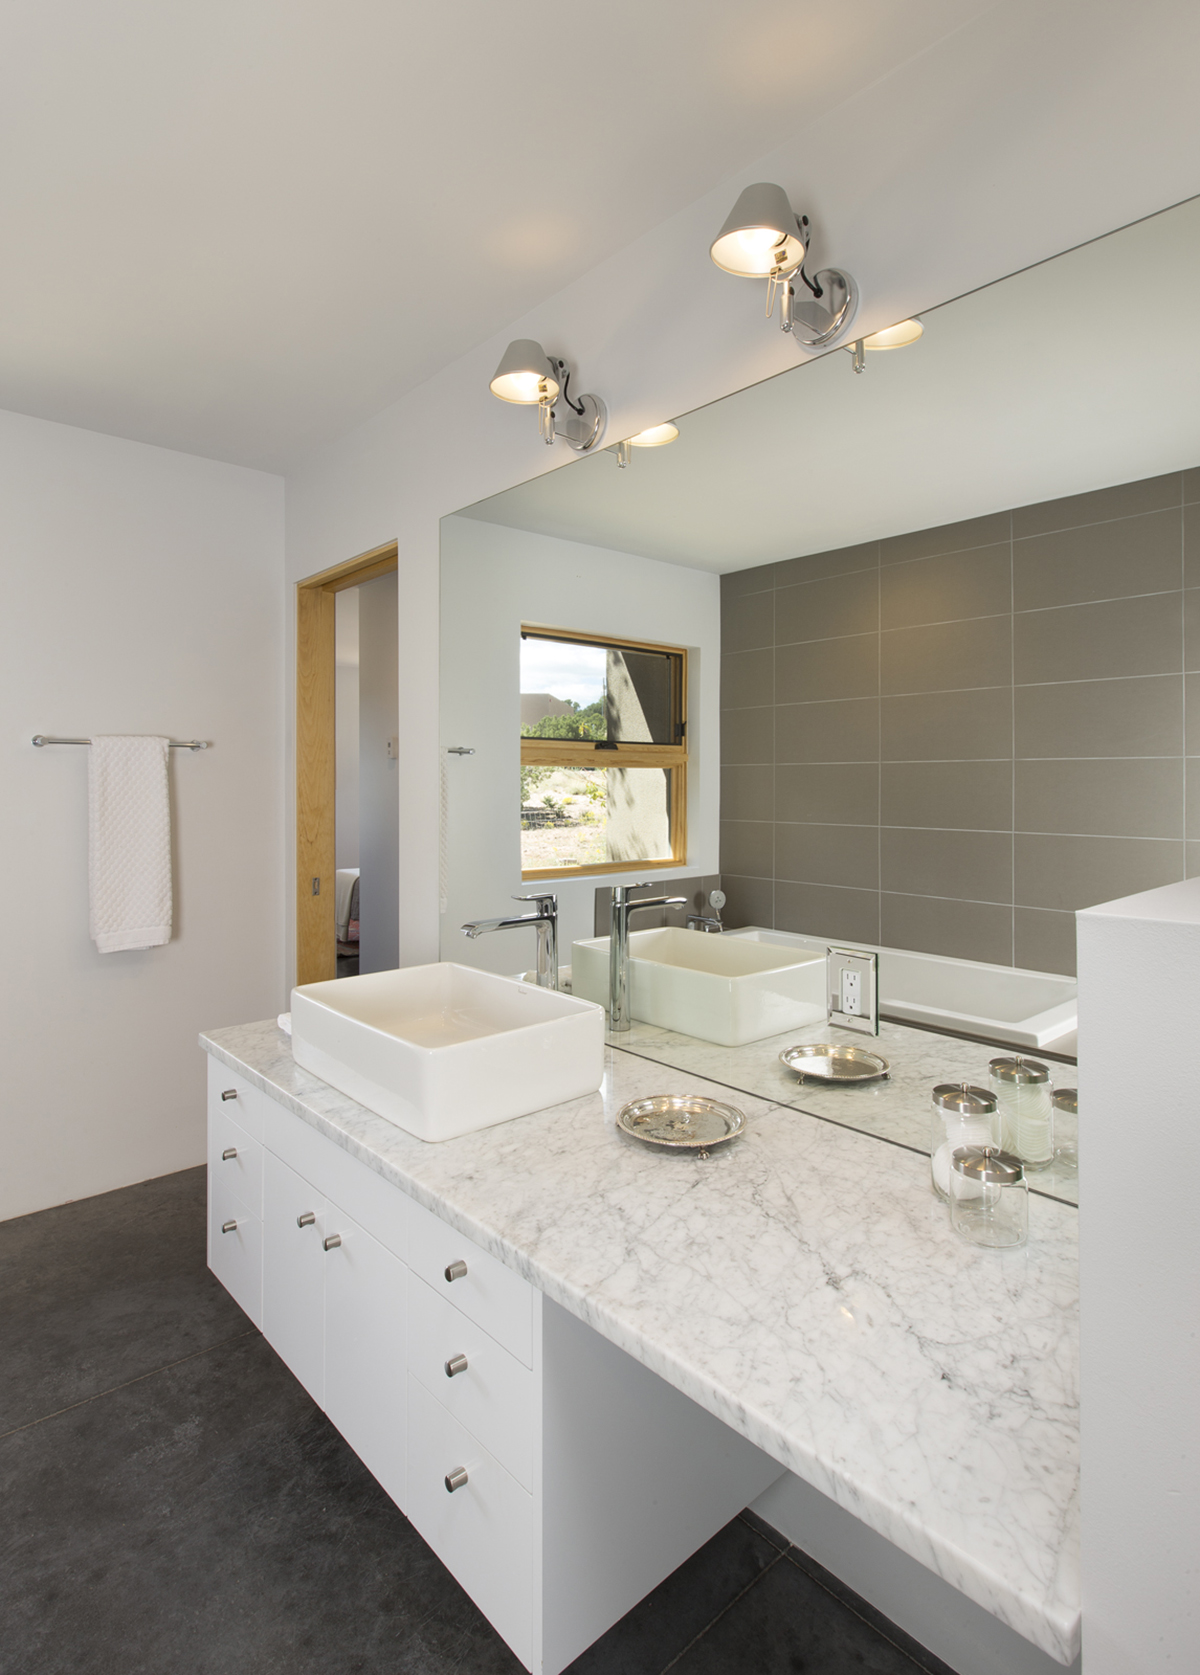 A Santa Fe style bathroom designed by an architect with two sinks and a mirror.